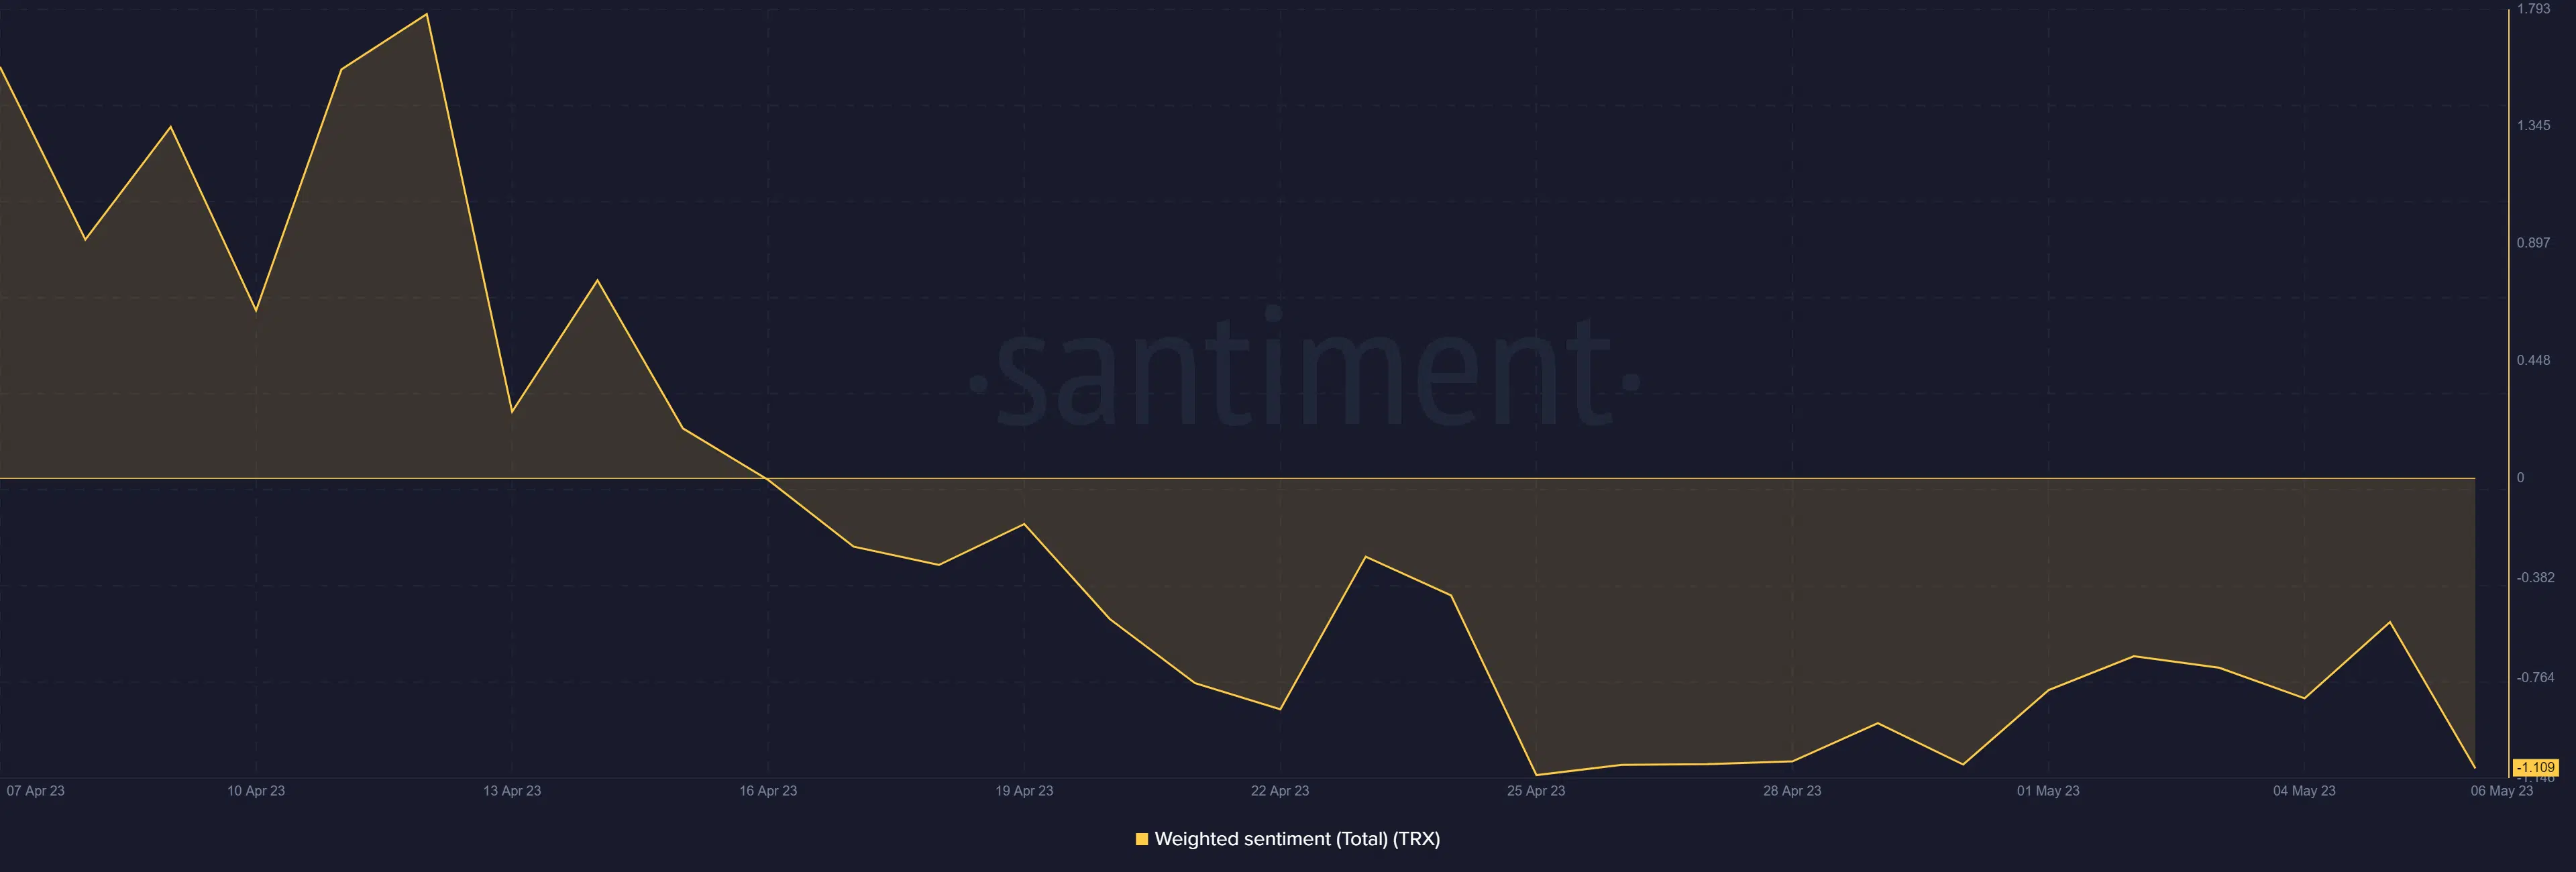 Tron weighted sentiment